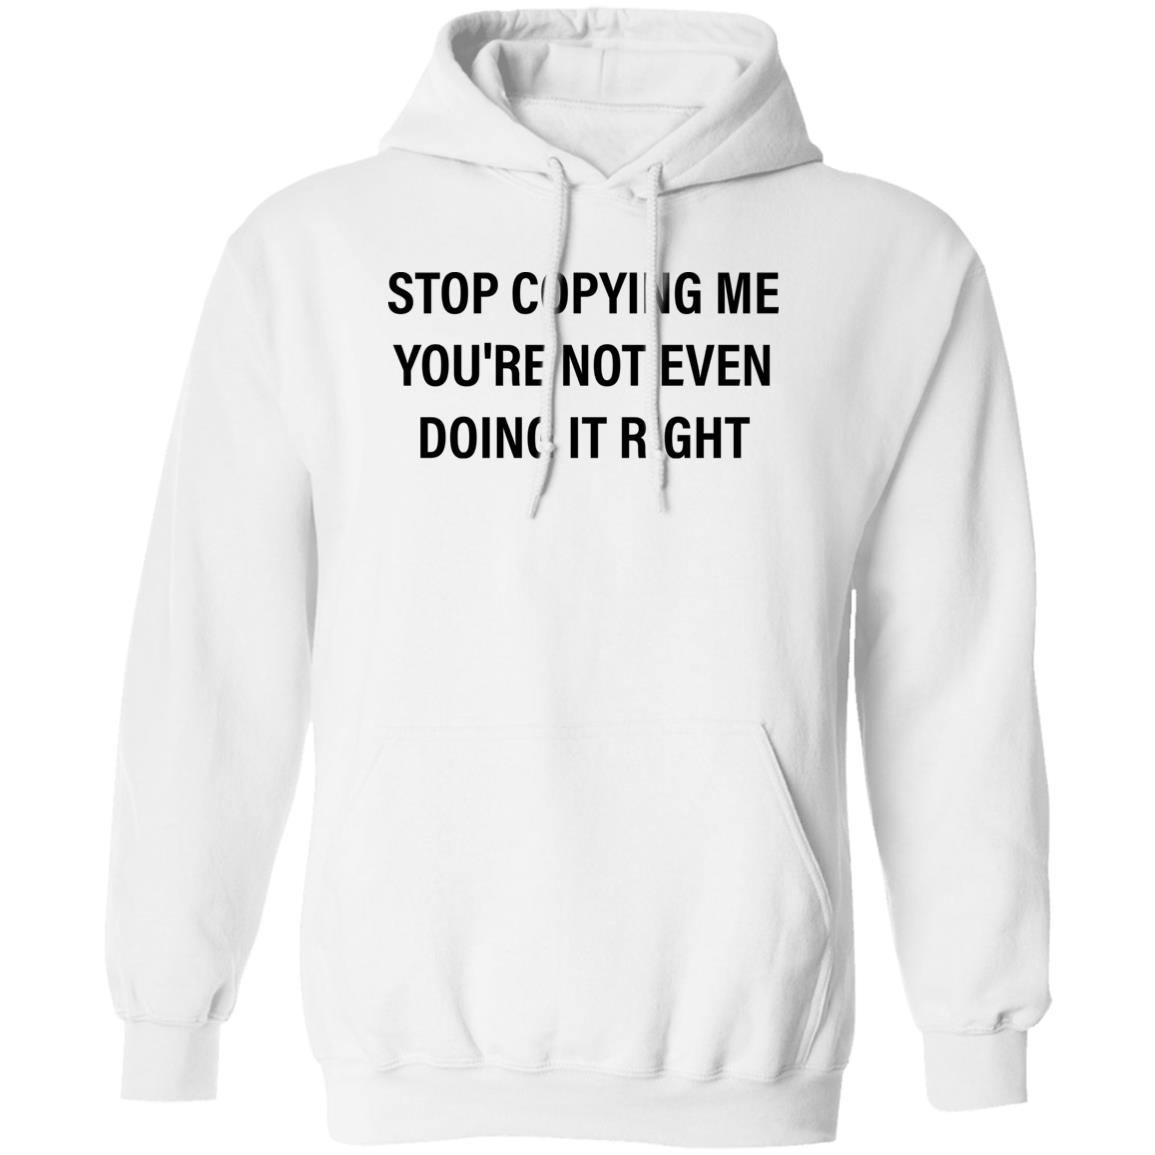 Stop Copying Me You’re Not Even Doing It Right Shirt 1